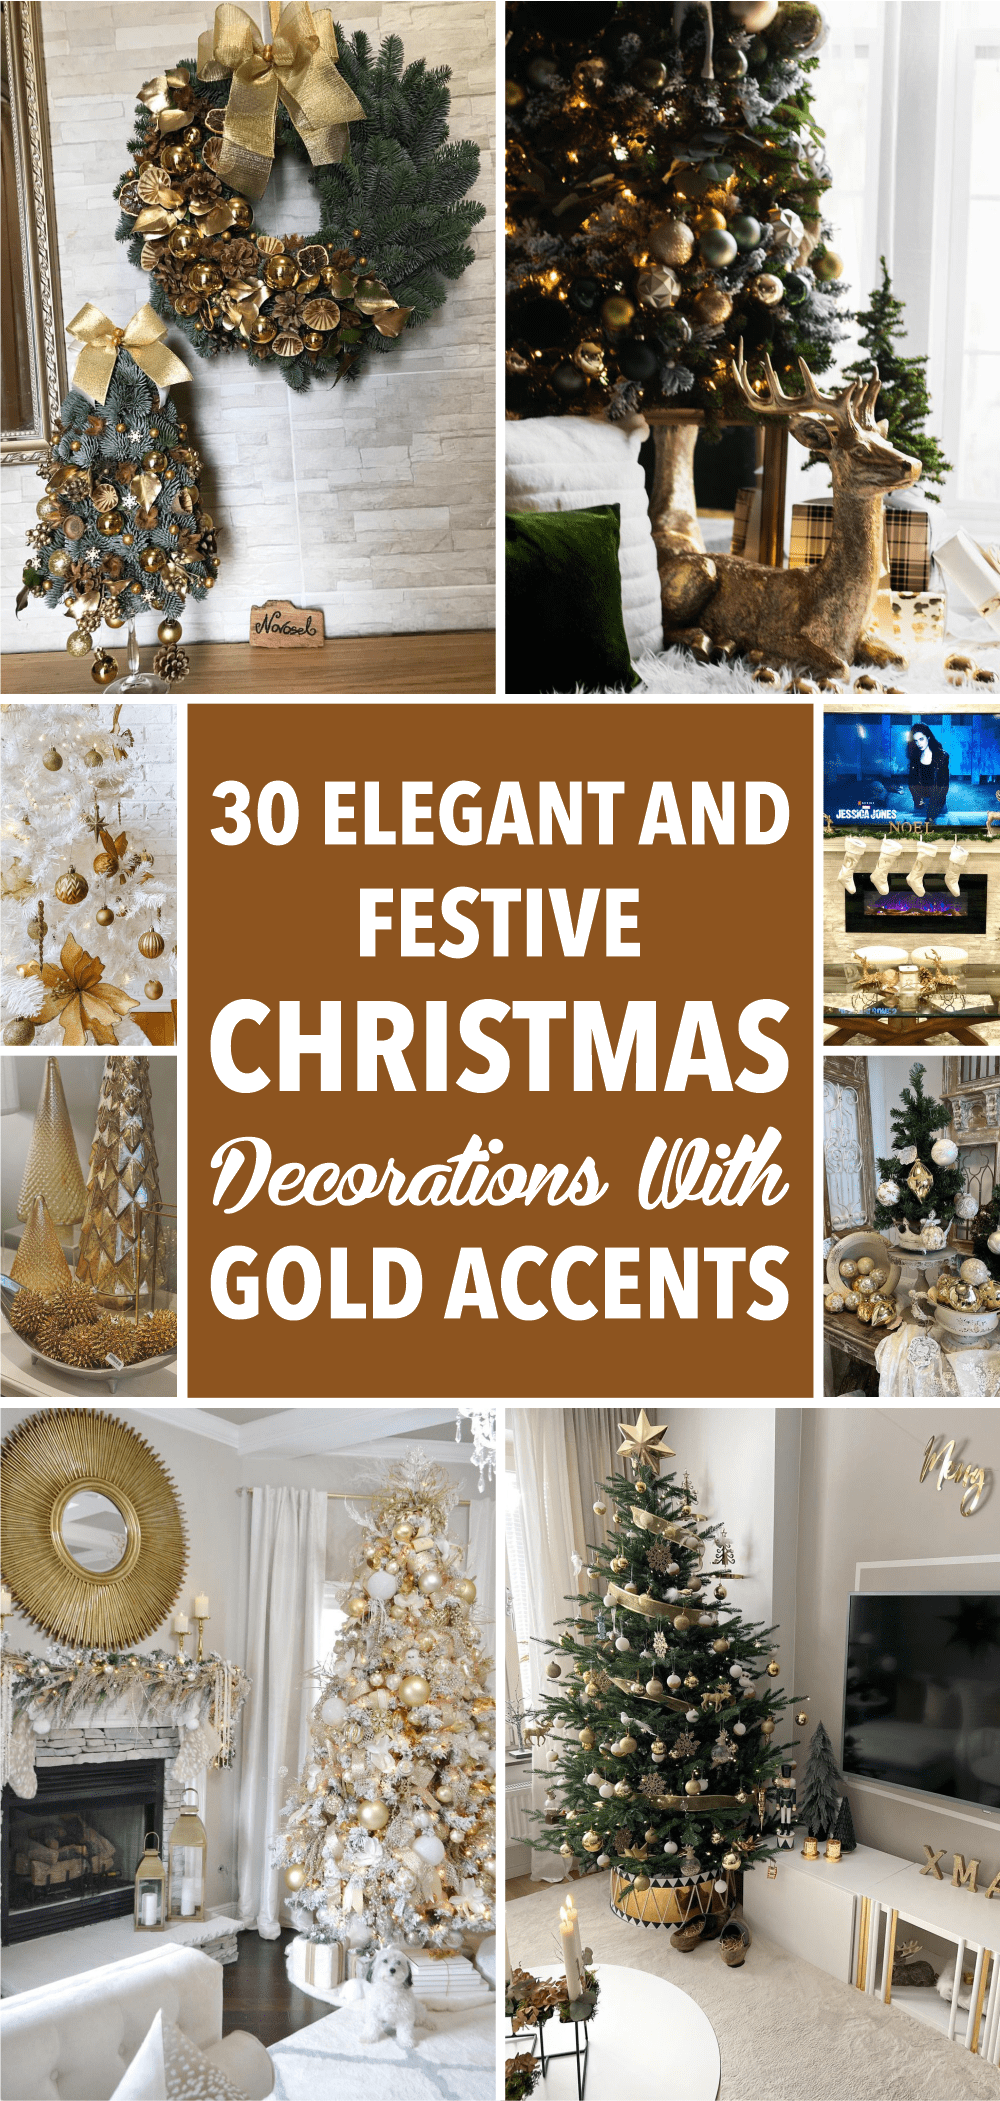 30 Elegant and Festive Christmas Decorations with Gold Accents